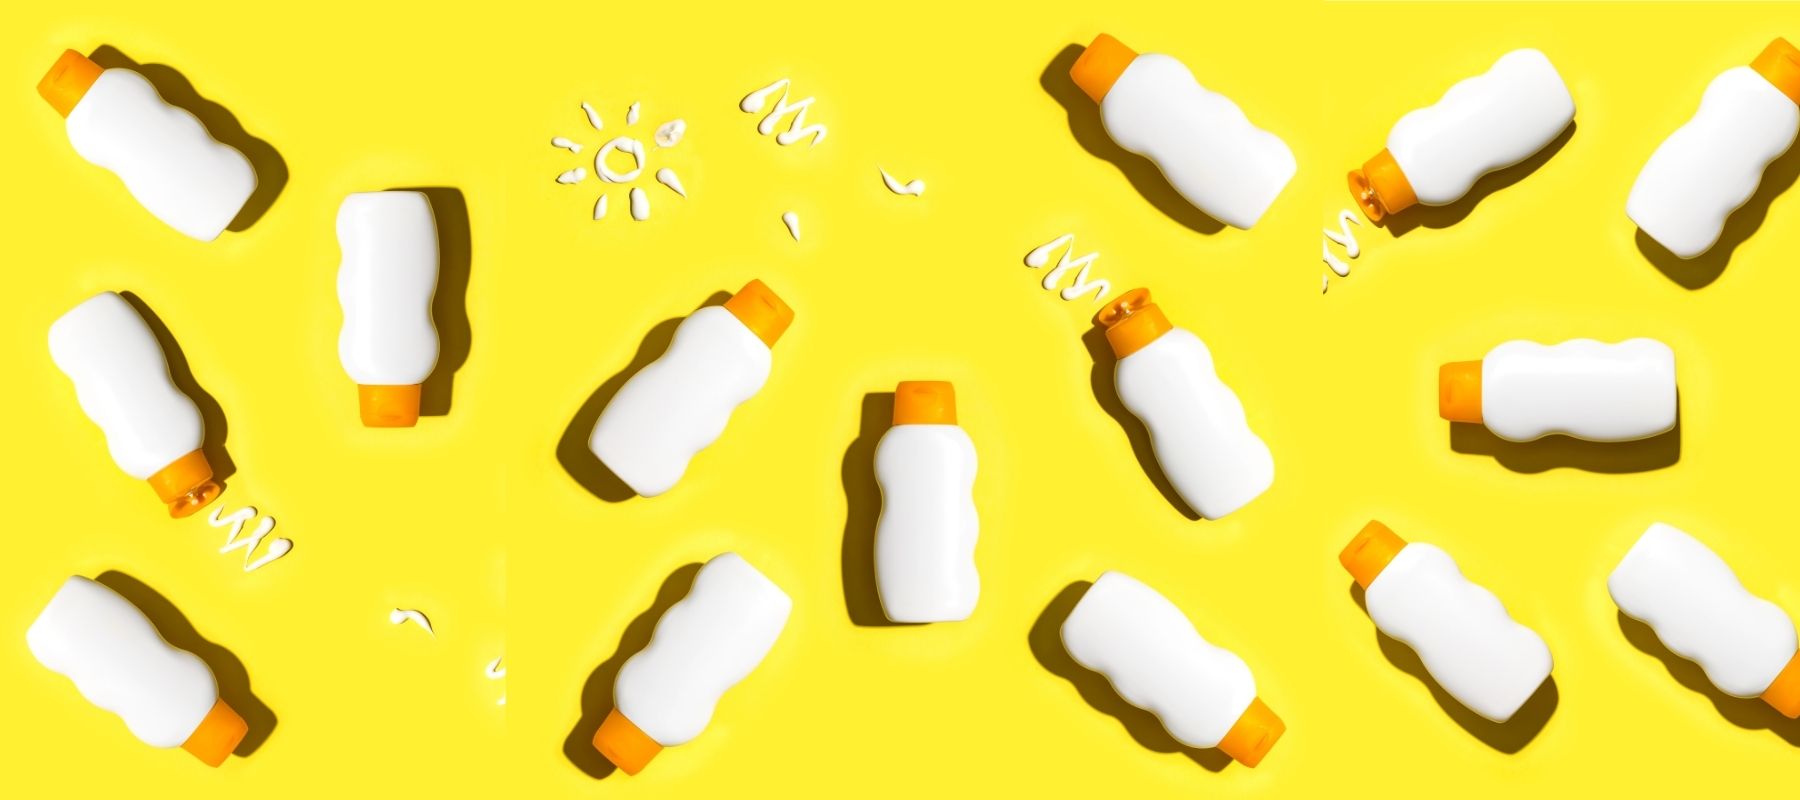 Sunscreen Storage Mistakes You Might Be Making